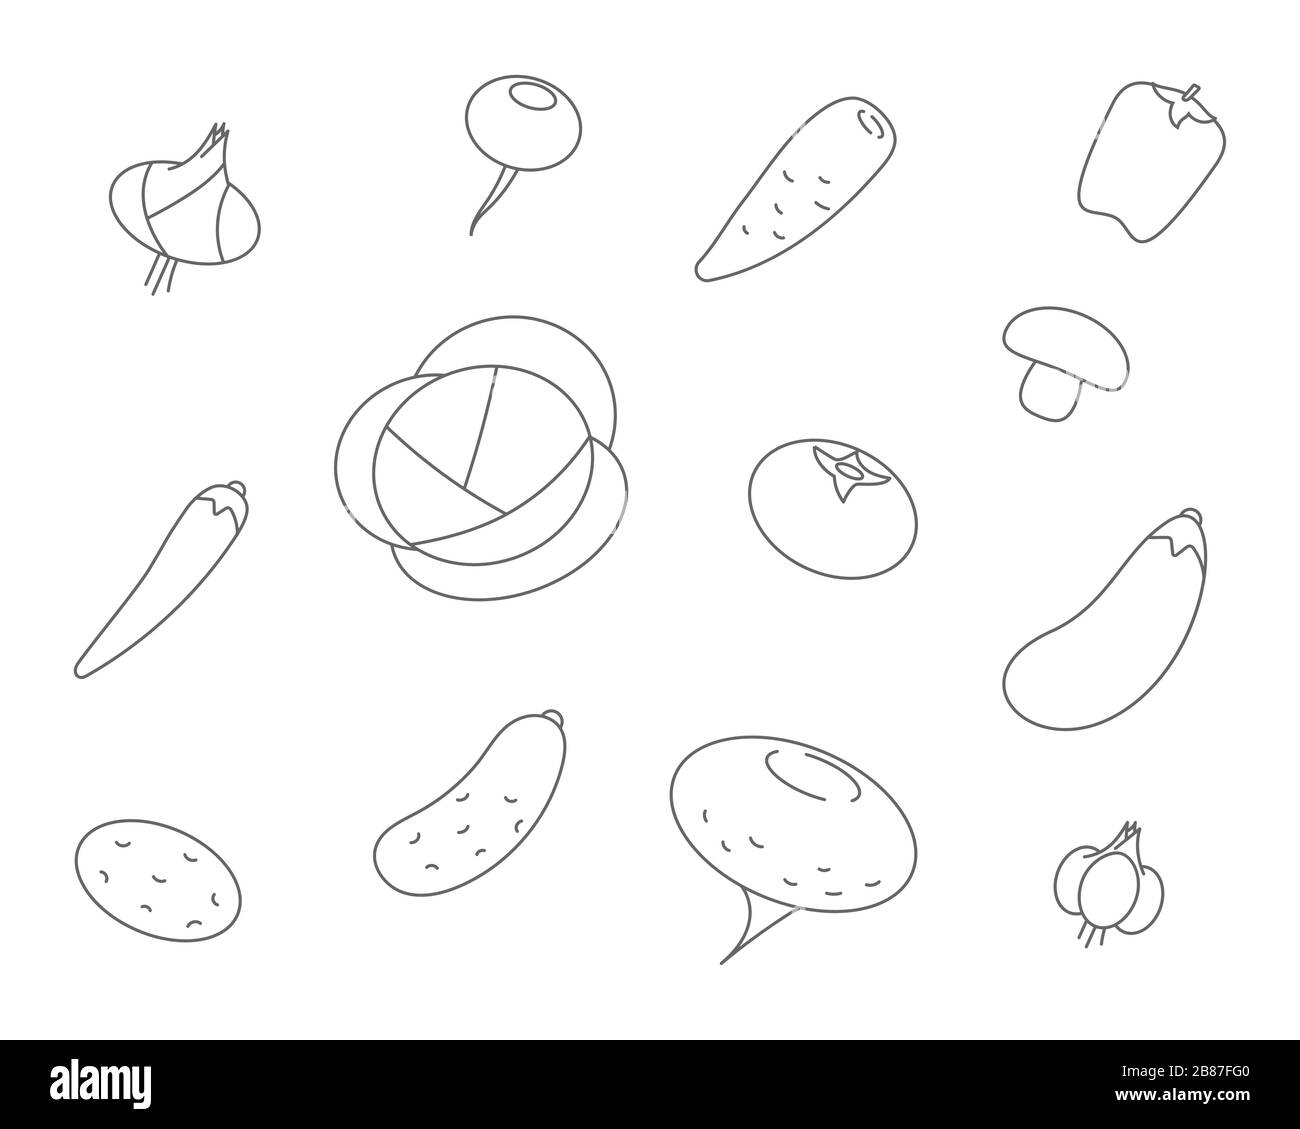 Vegetables line icons. Set vector icon of vegetable cabbage, carrots, cucumber, garlic, onions, peppers. Stock Vector